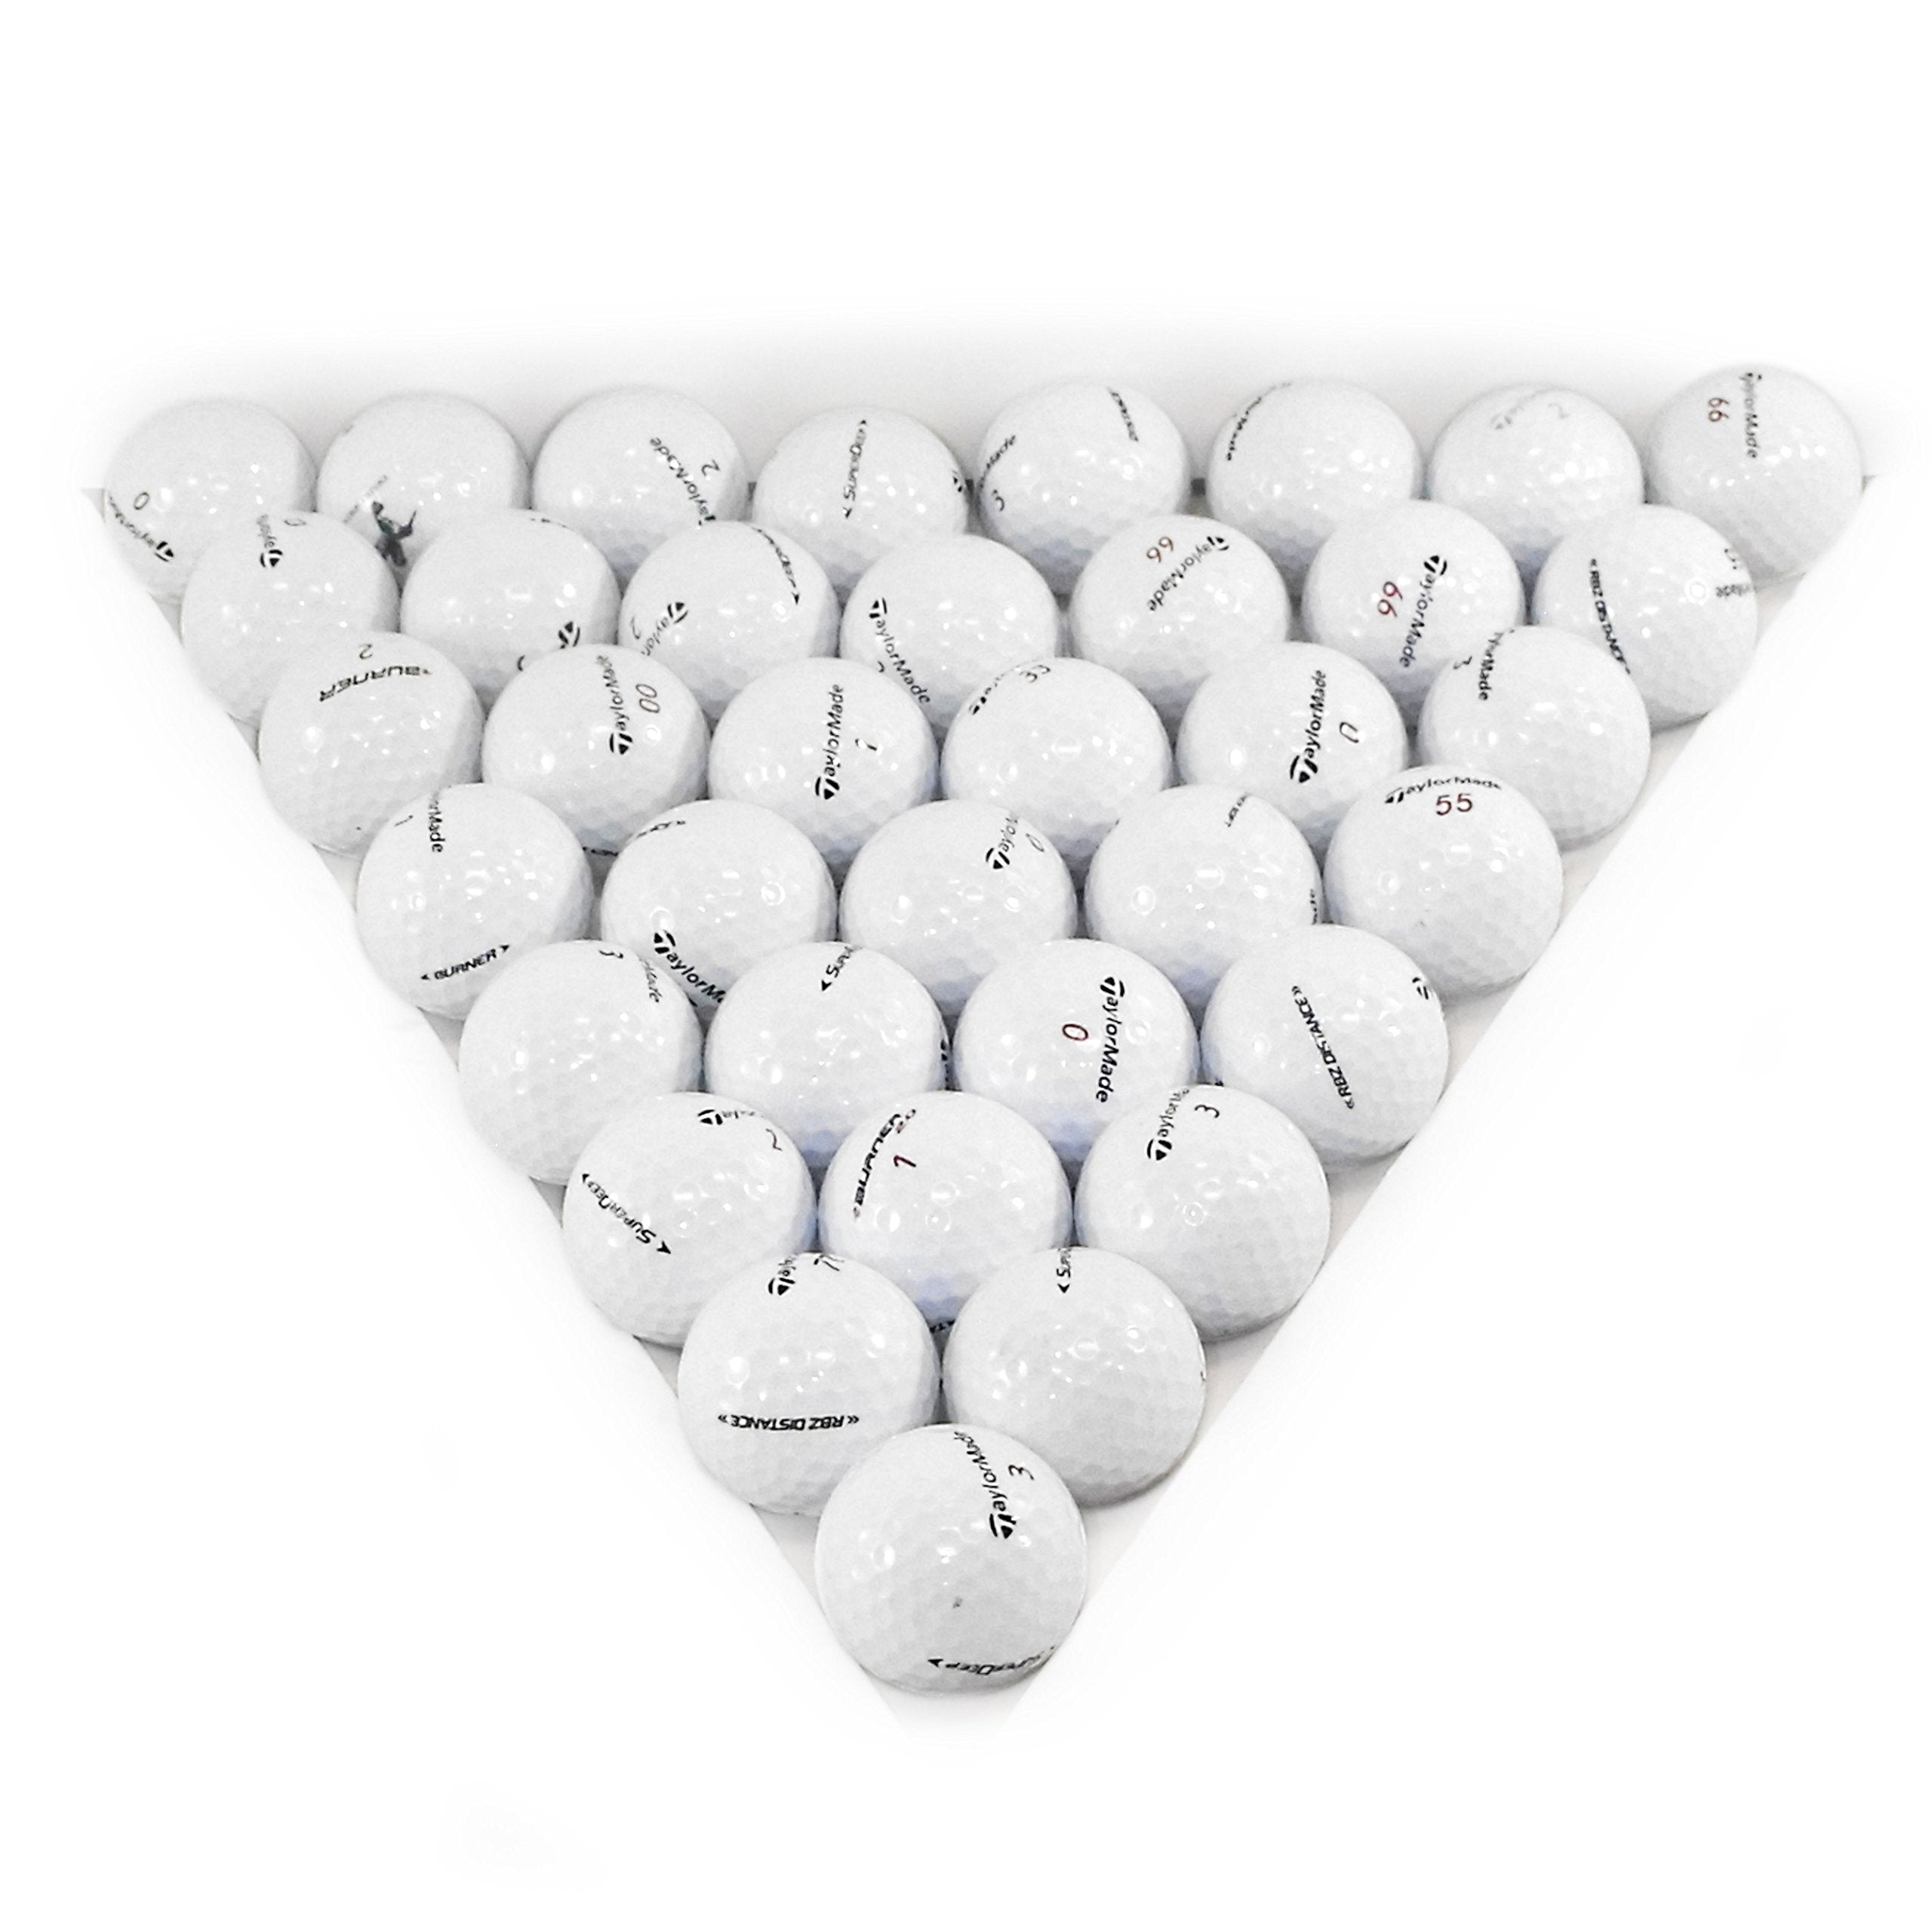 TaylorMade Assorted Models White 36 Pack Golf Balls Mint Condition () - JOY2ESpree